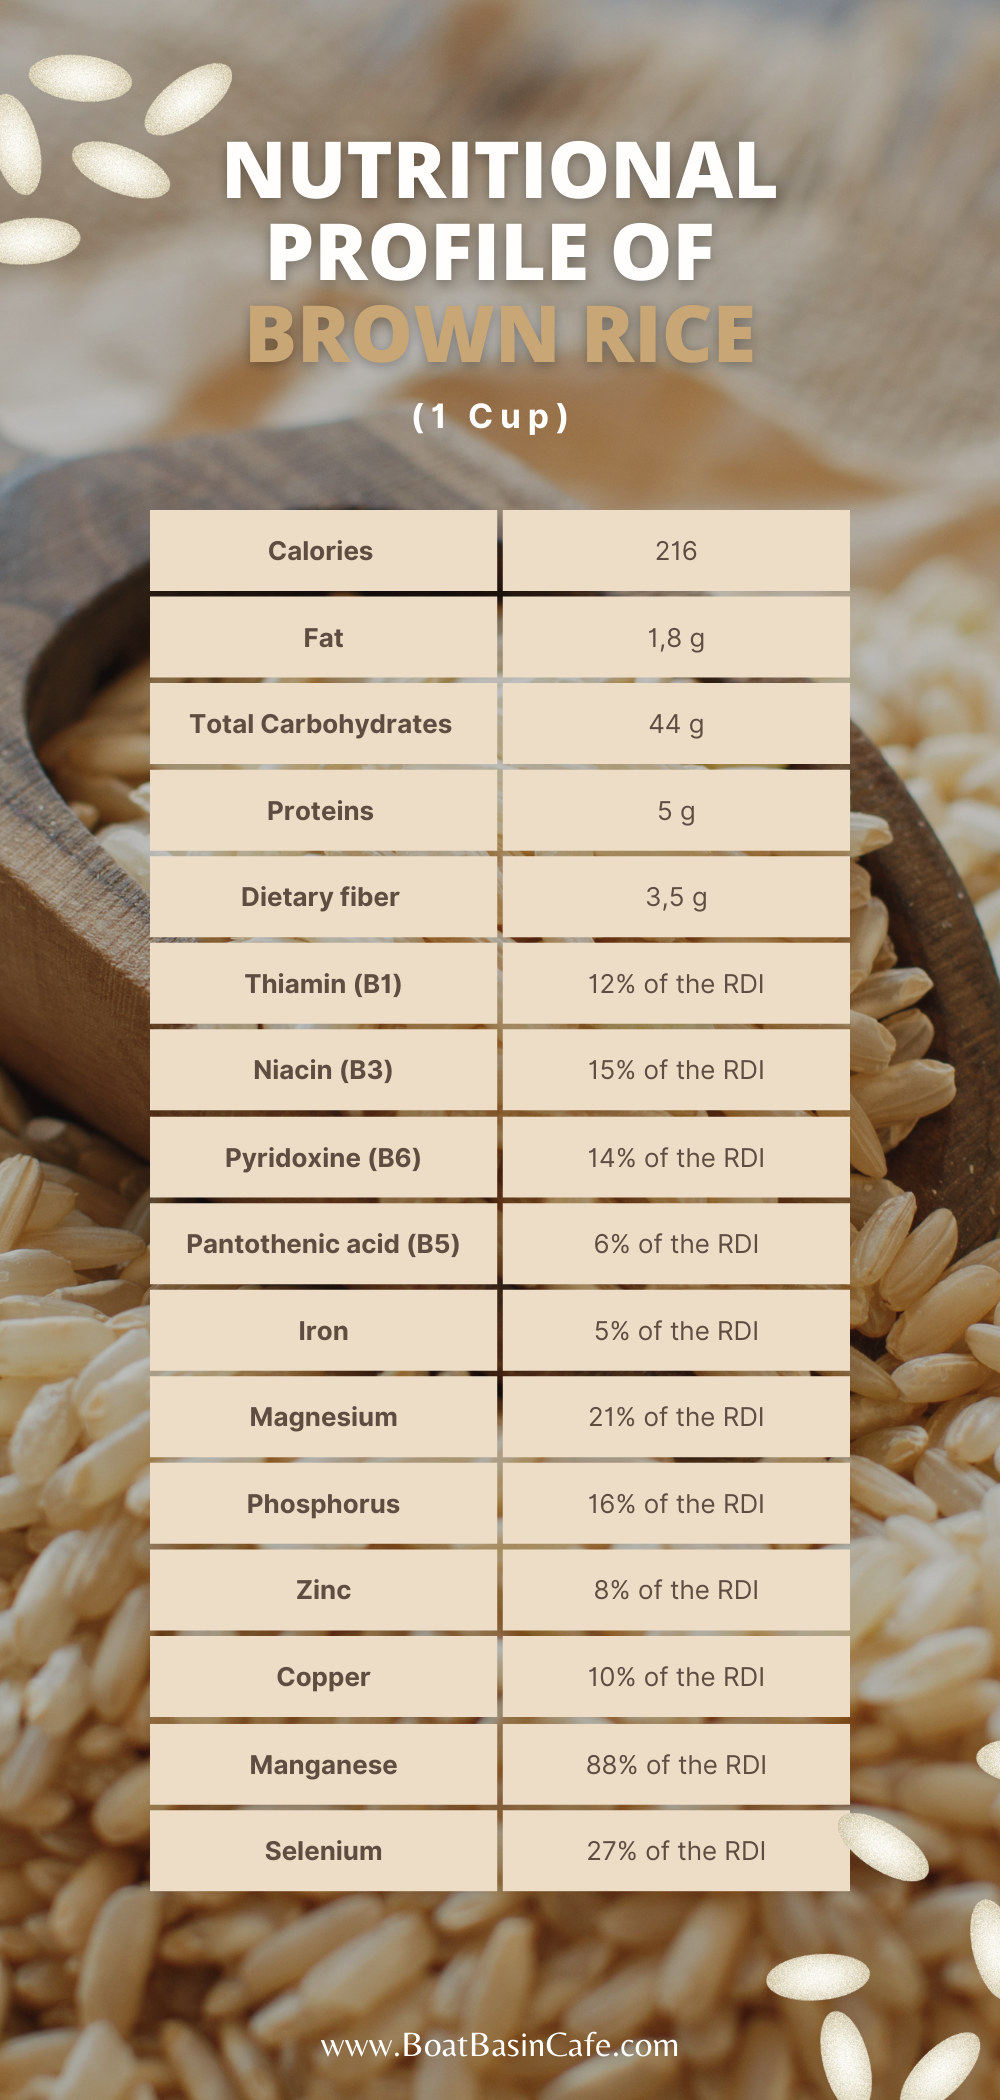 Nutritional Profile of Brown Rice